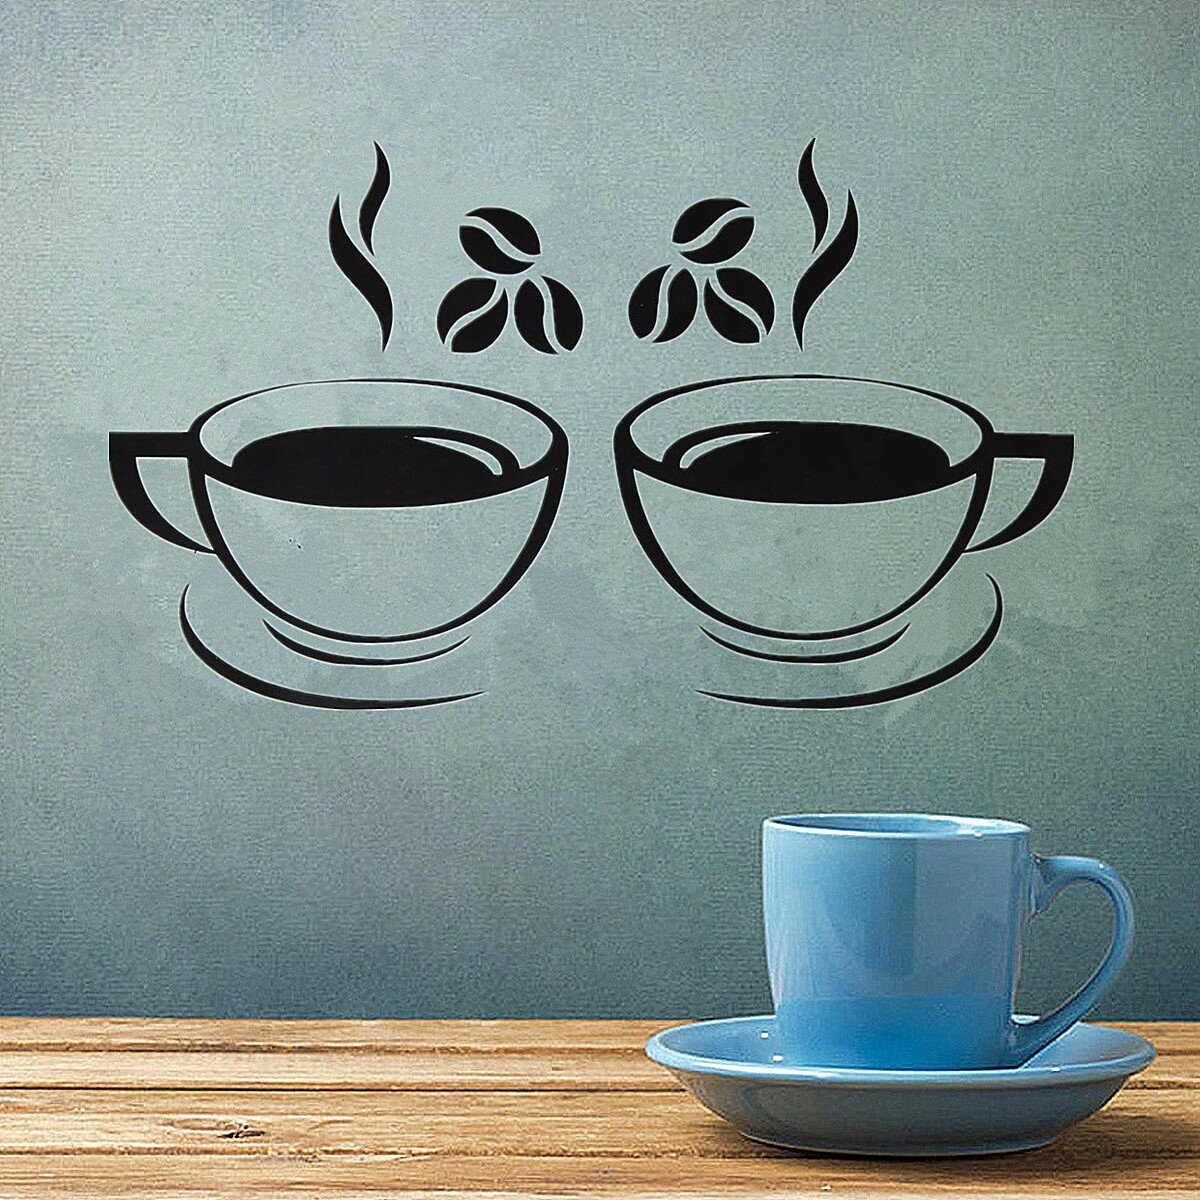 Double Coffee Cups Wall Stickers Waterproof Vinyl Adhesive Art Wall Decals Coffee Shop Kitchen Home Office Decorations Accessories